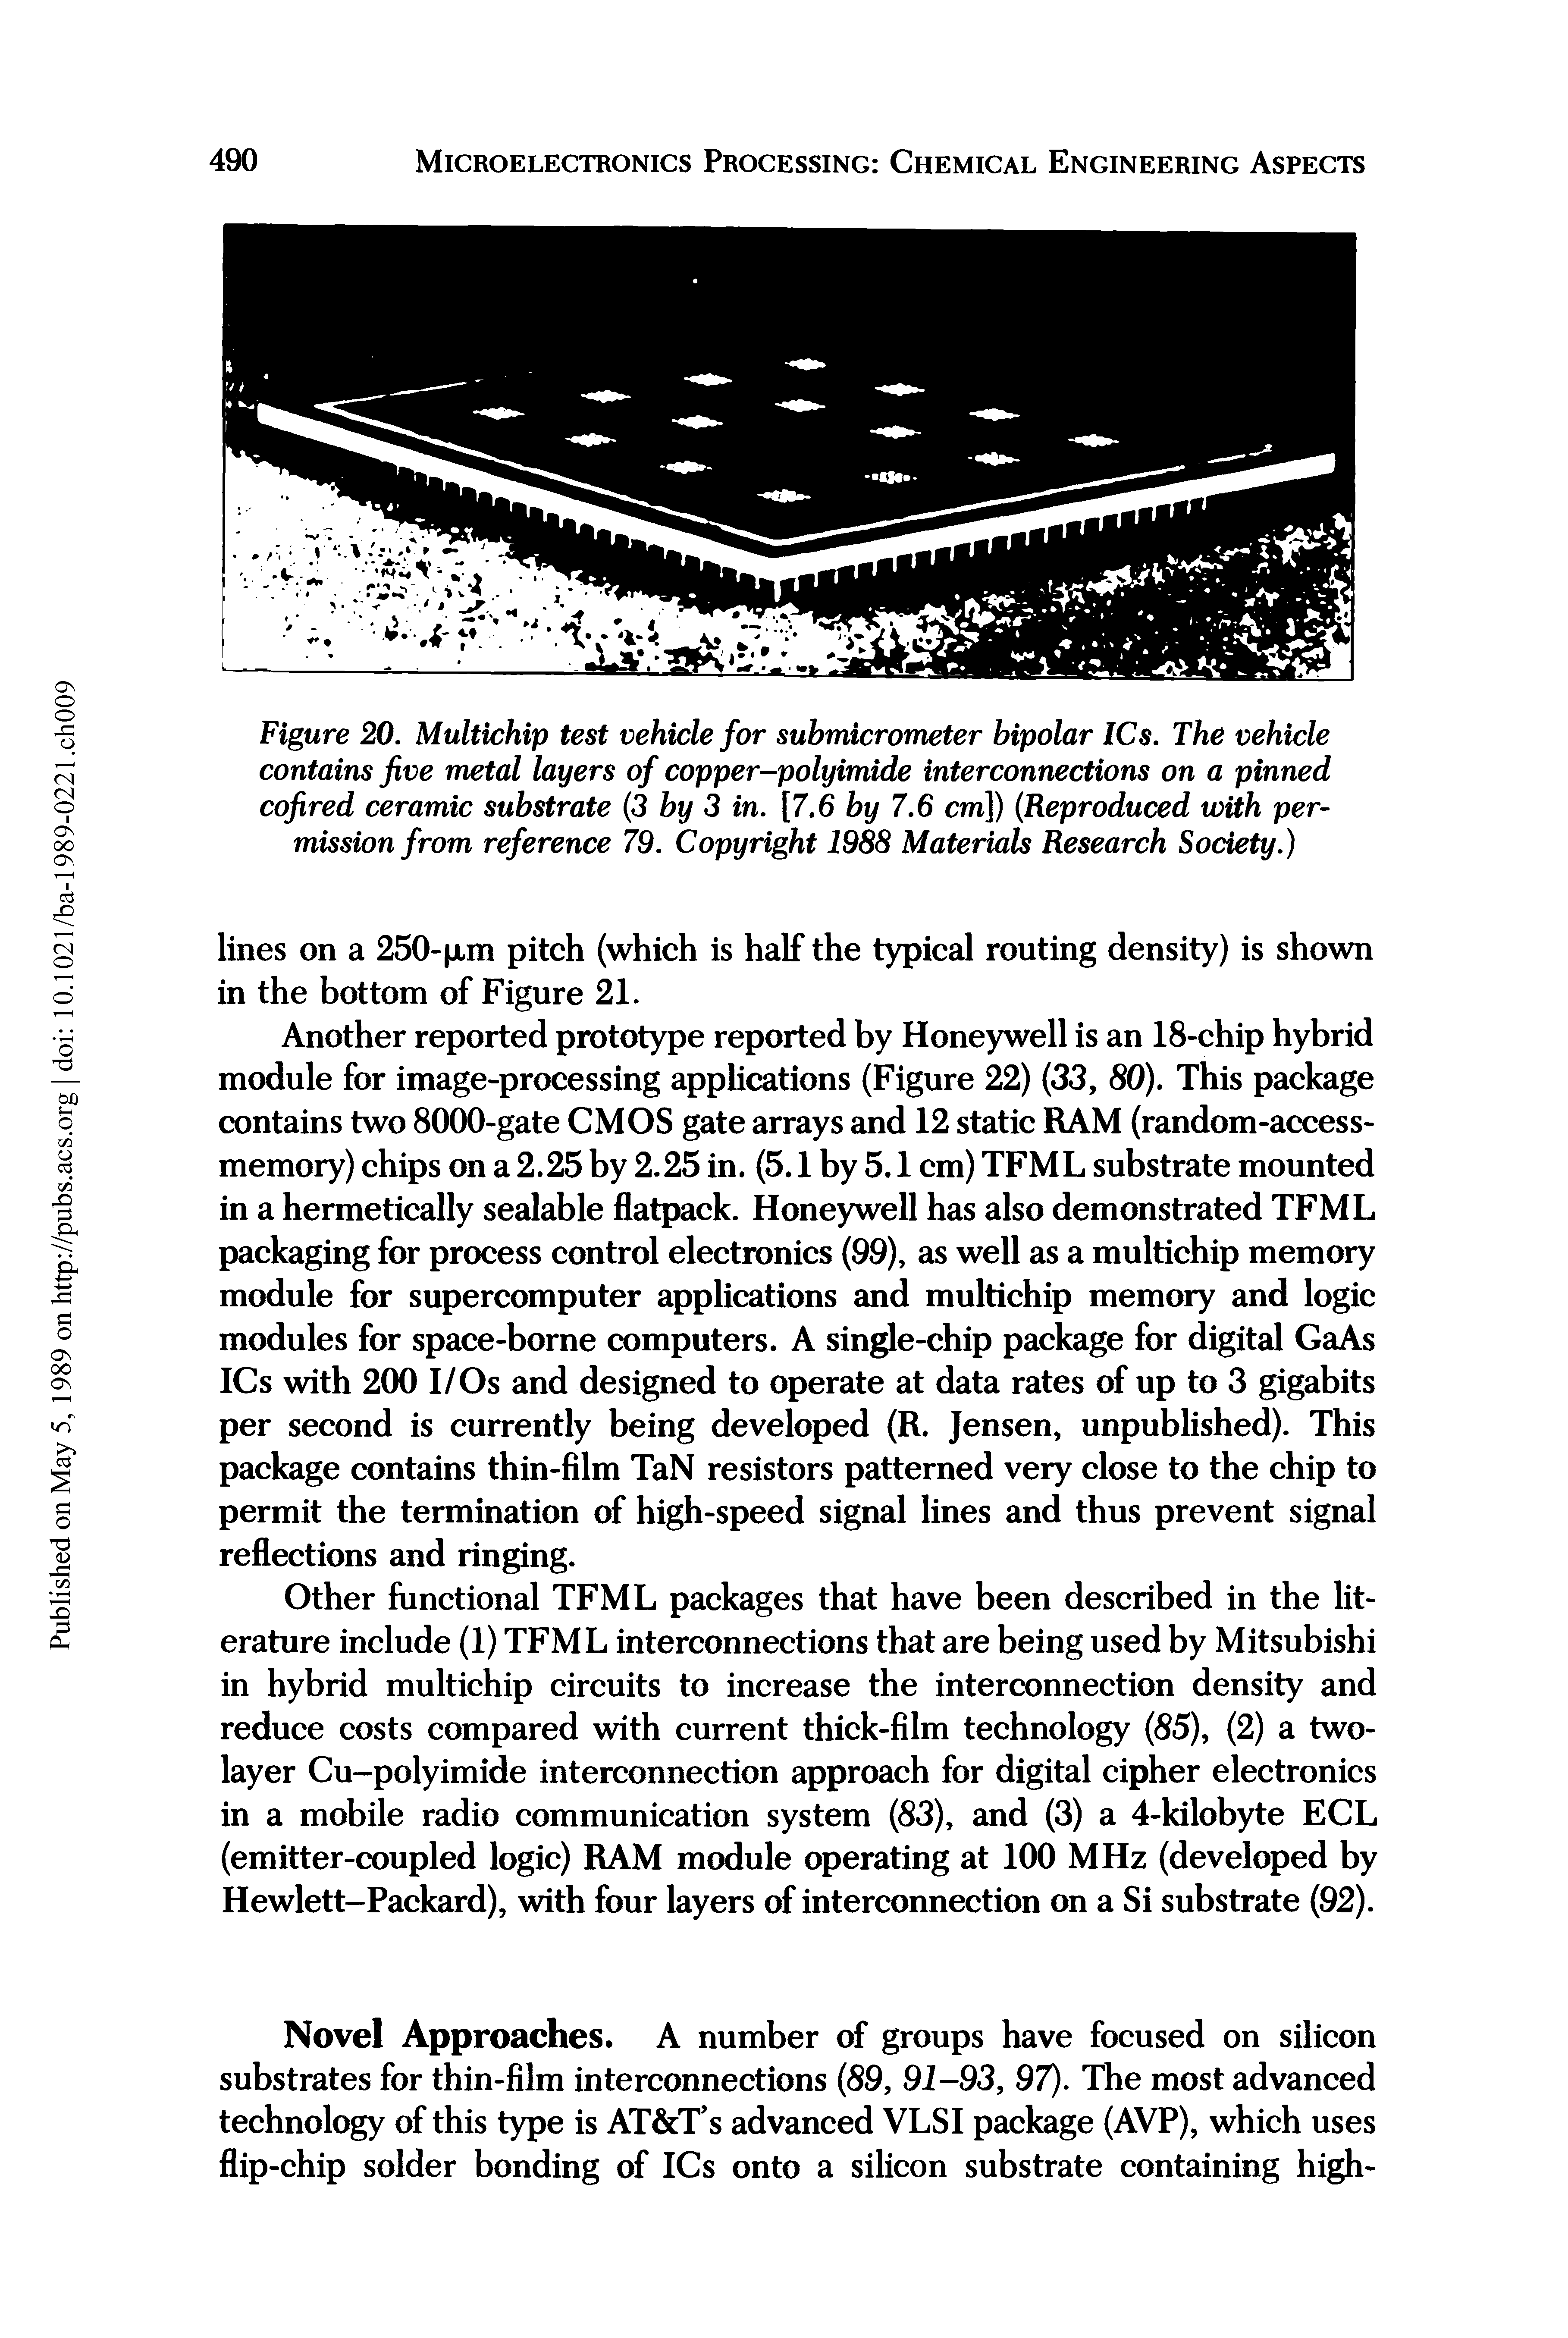 Figure 20. Multichip test vehicle for submicrometer bipolar ICs. The vehicle contains Jive metal layers of copper-polyimide interconnections on a pinned cofired ceramic substrate (3 by 3 in. [7,6 by 7.6 cm]) (Reproduced with permission from reference 79. Copyright 1988 Materials Research Society.)...